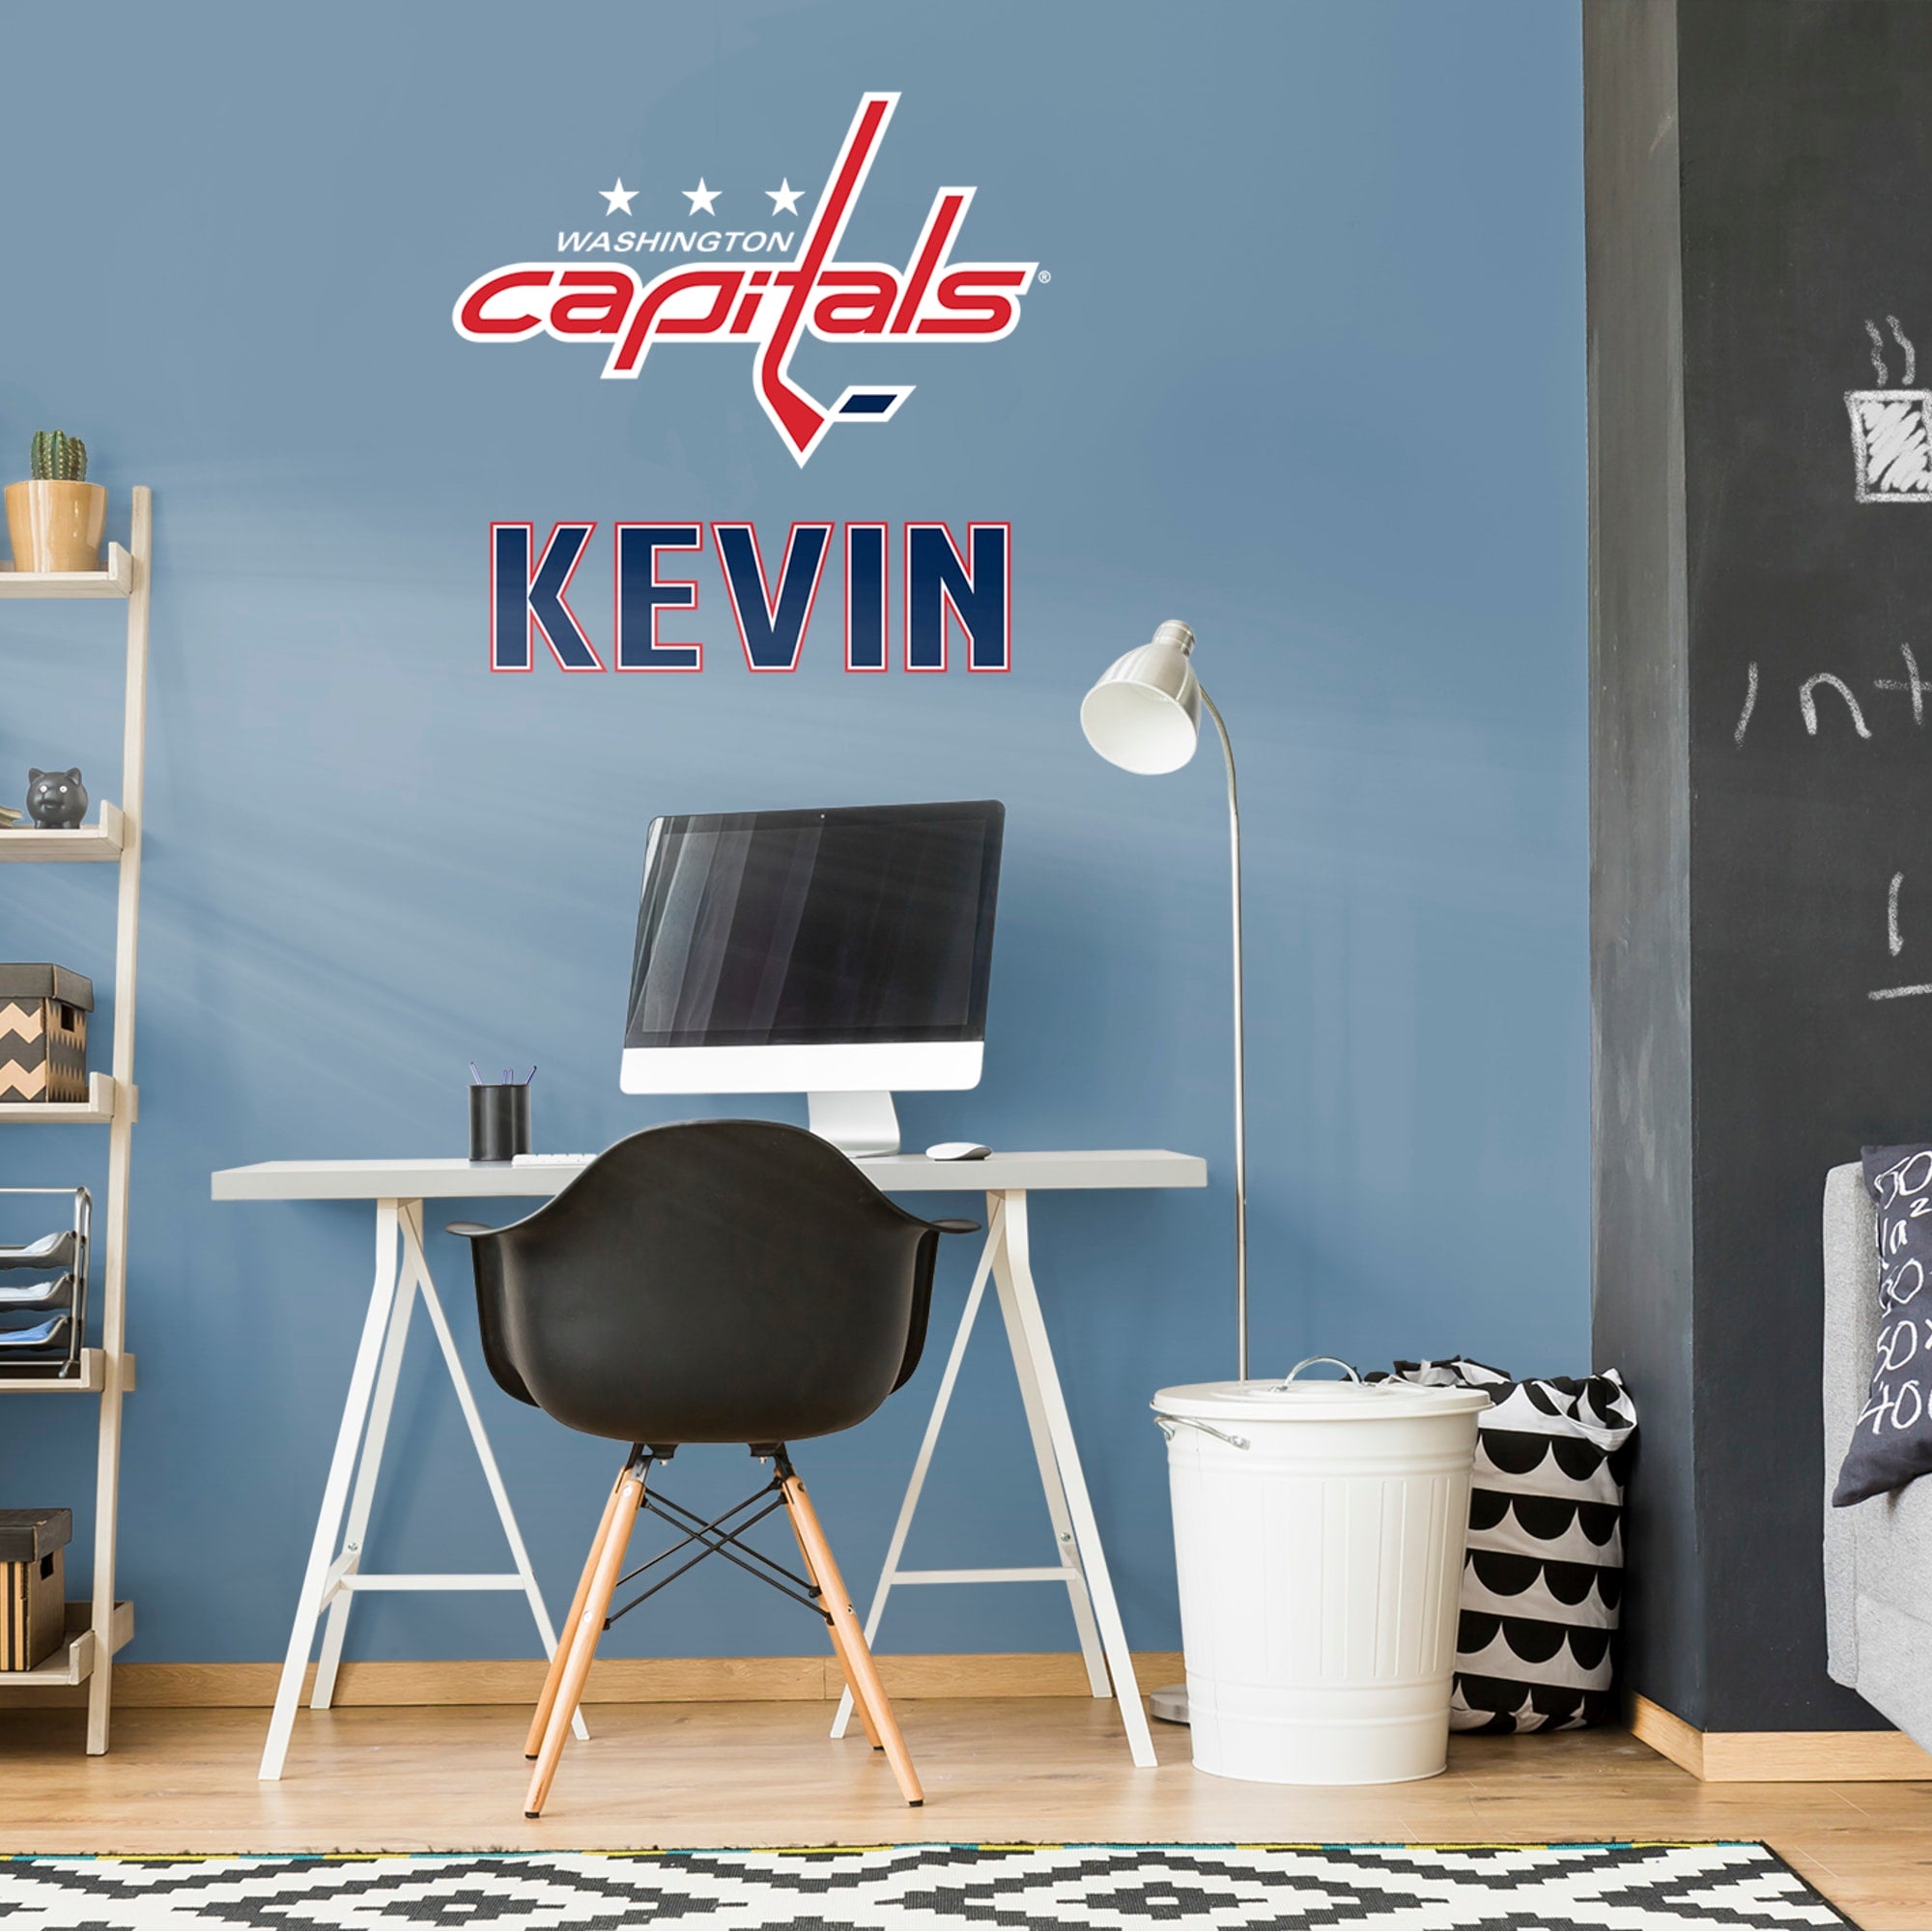 Washington Capitals: Stacked Personalized Name - Officially Licensed NHL Transfer Decal in Red/Navy (39.5"W x 52"H) by Fathead |